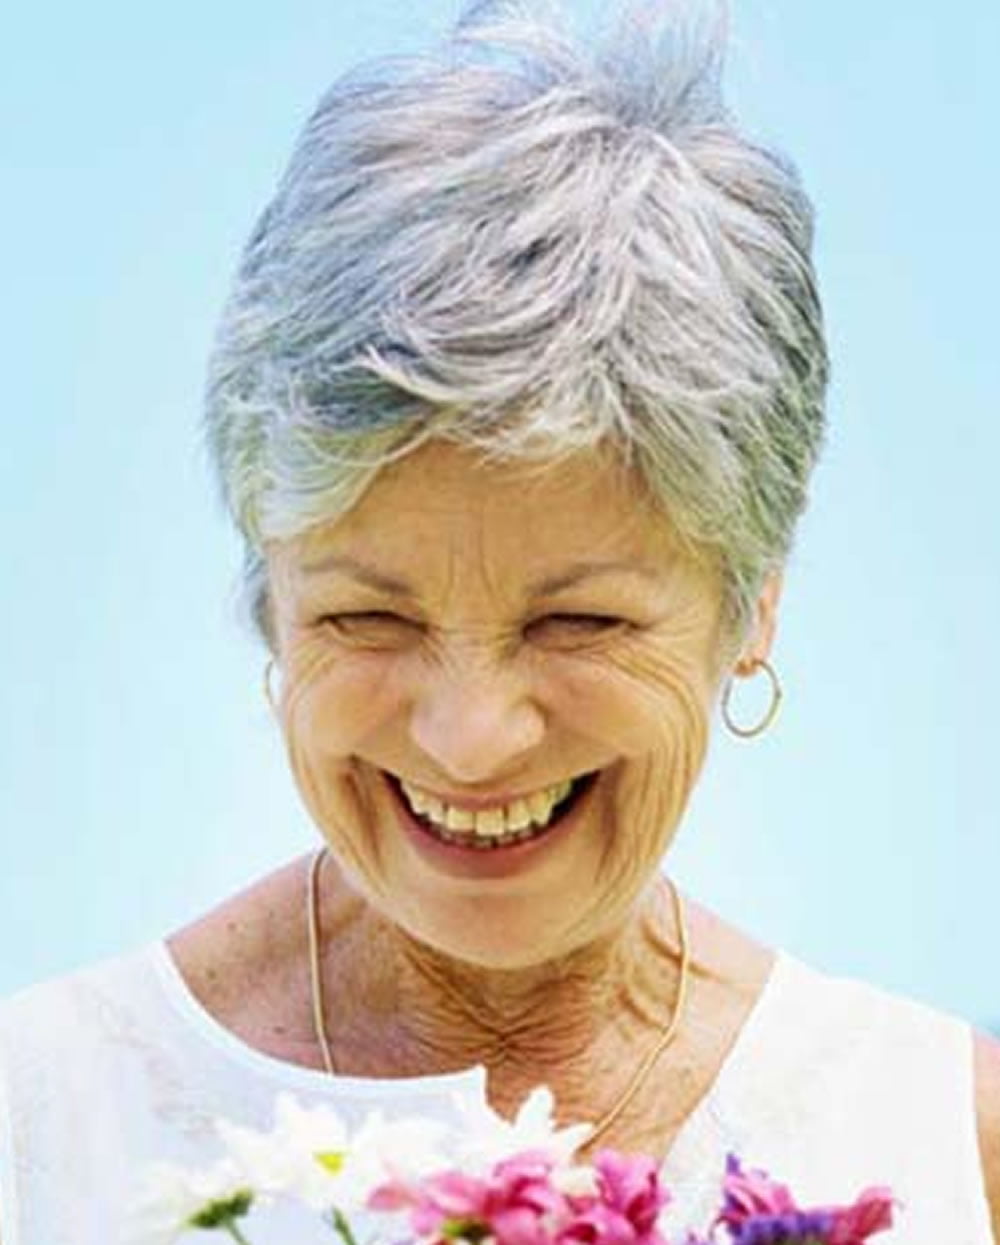 Short Gray Hairstyle Images and Hair Color Ideas for Older Women Over 50 4